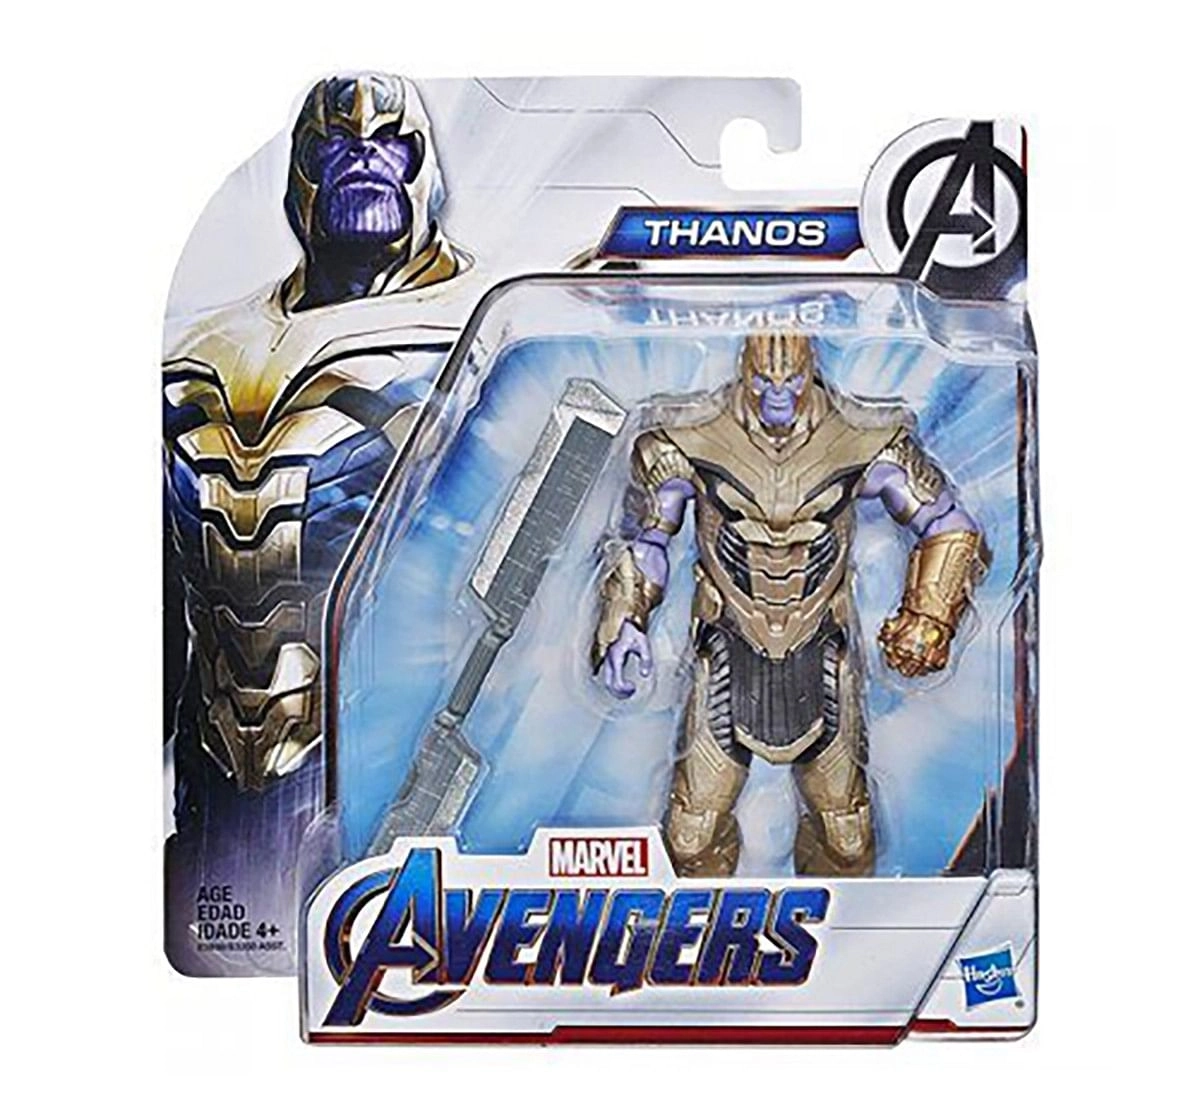 Marvel Avengers: Endgame Deluxe Figures Assorted for Kids age 4Y+ 